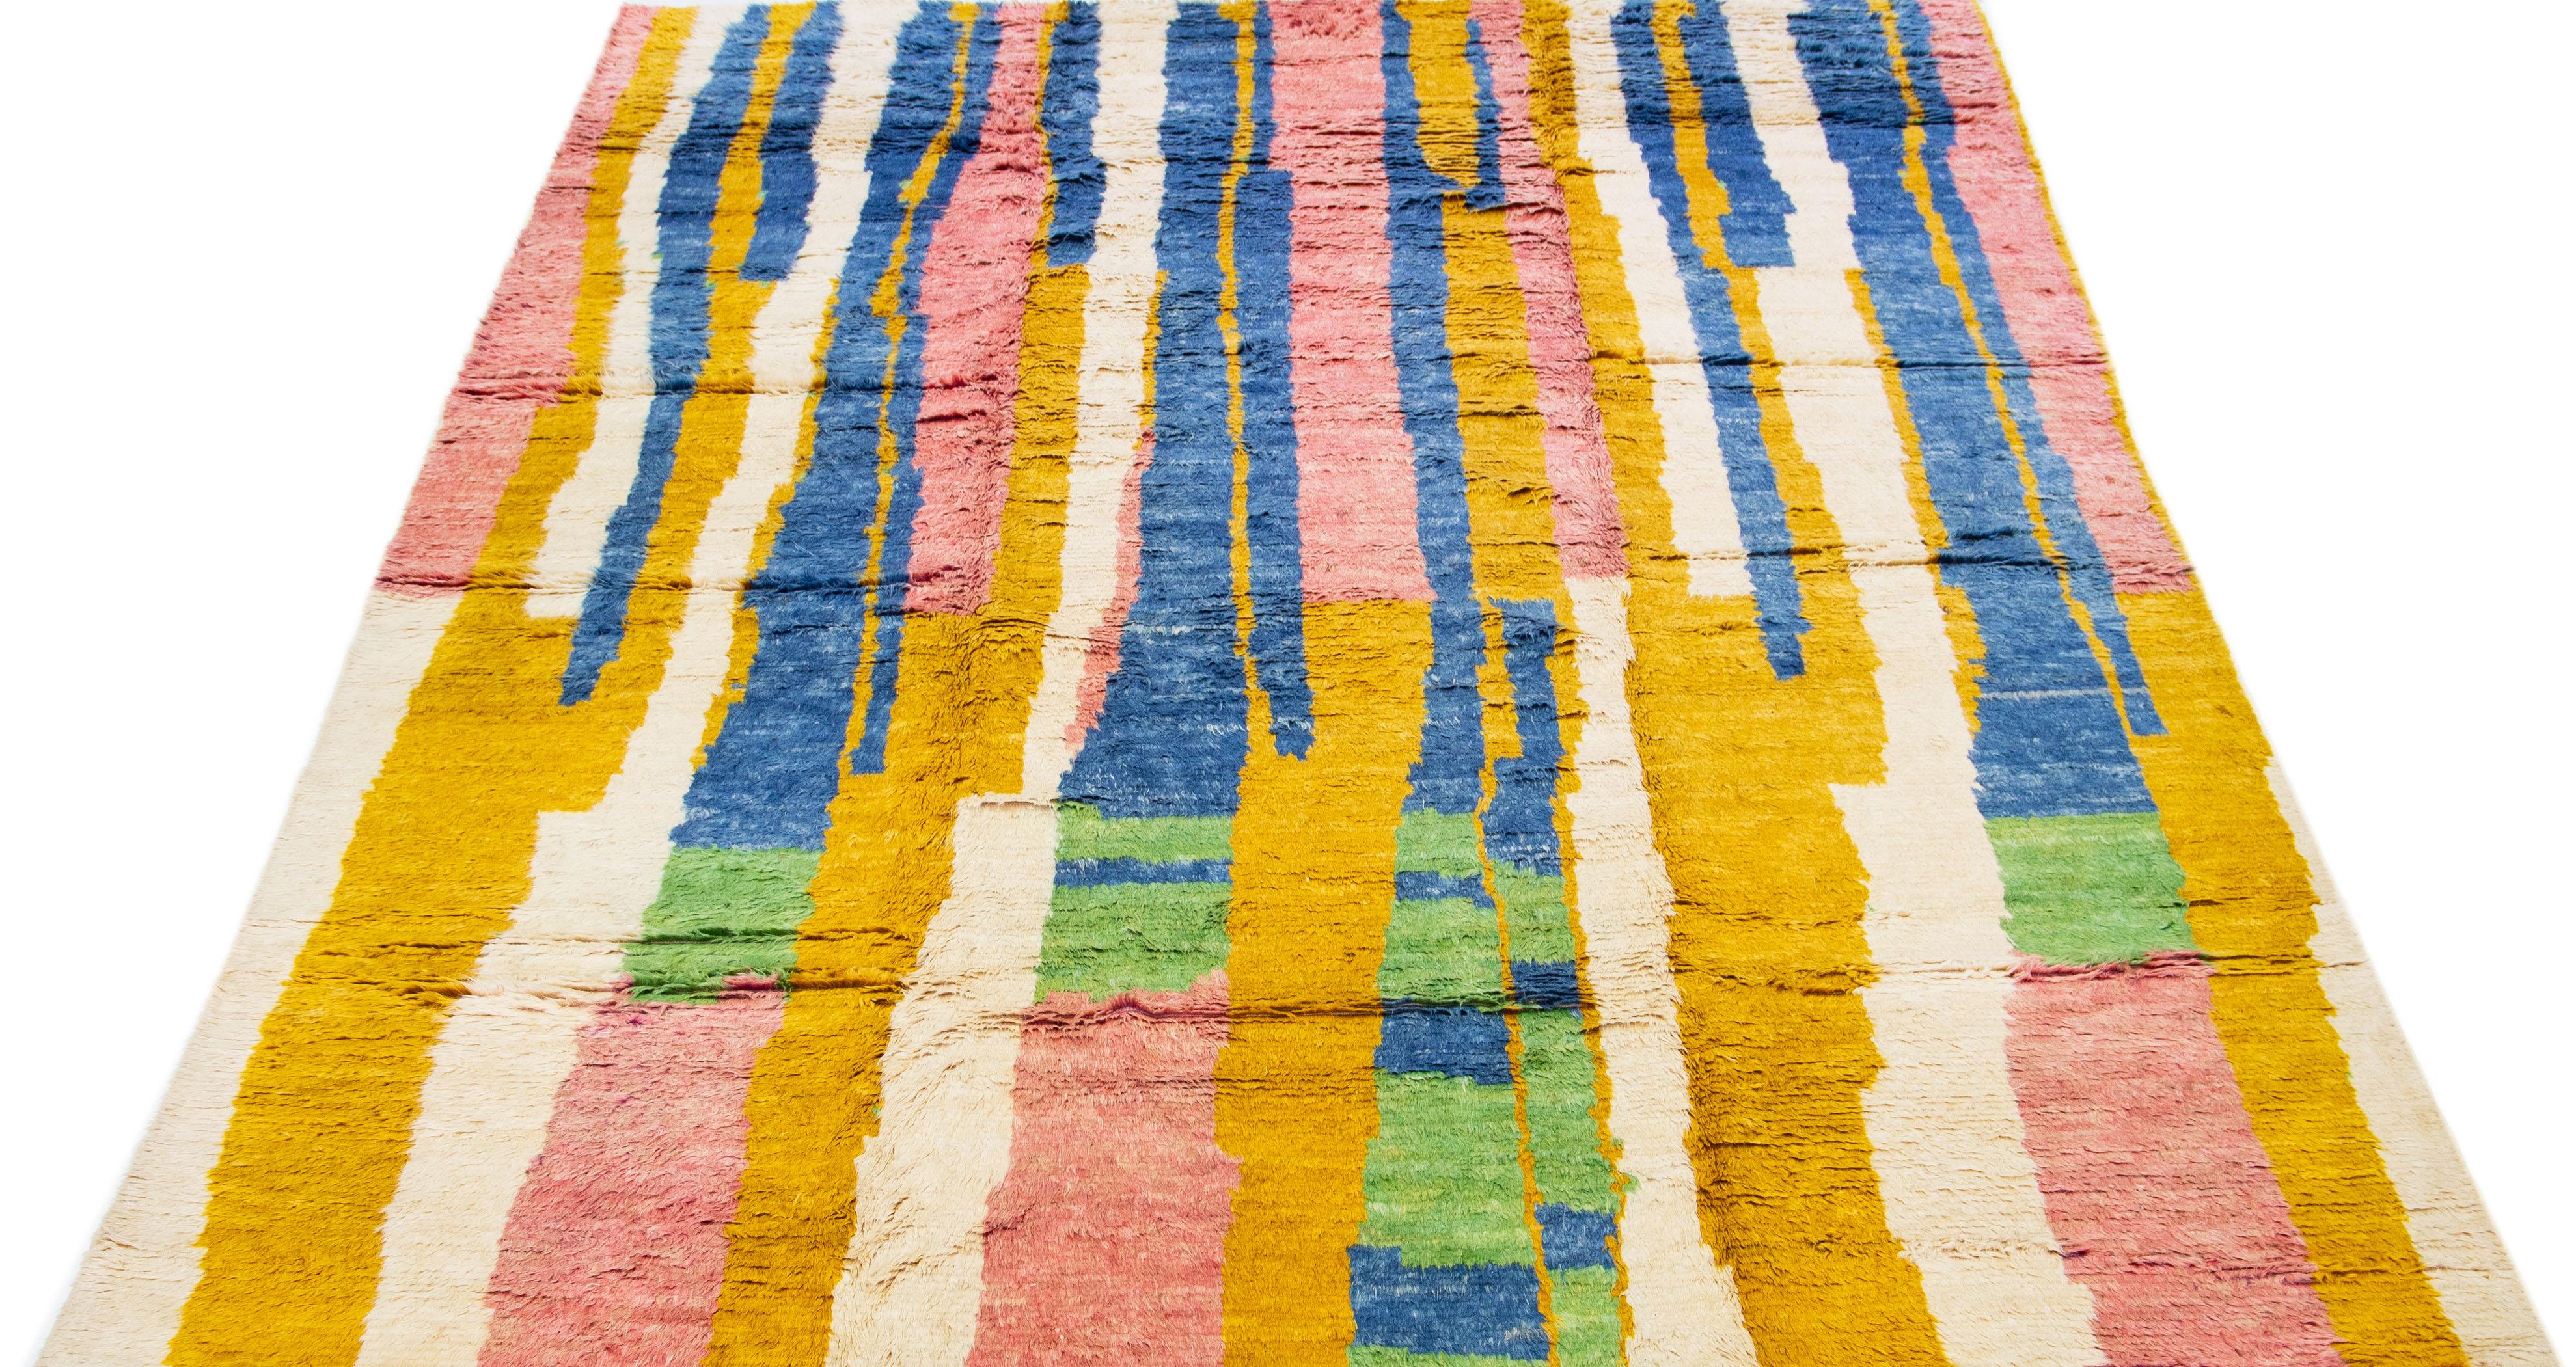 This crafted Moroccan-inspired rug features a captivating abstract striped design in a variety of stunning colors, which has been meticulously hand knotted using high-quality wool.

This rug measures 9'8